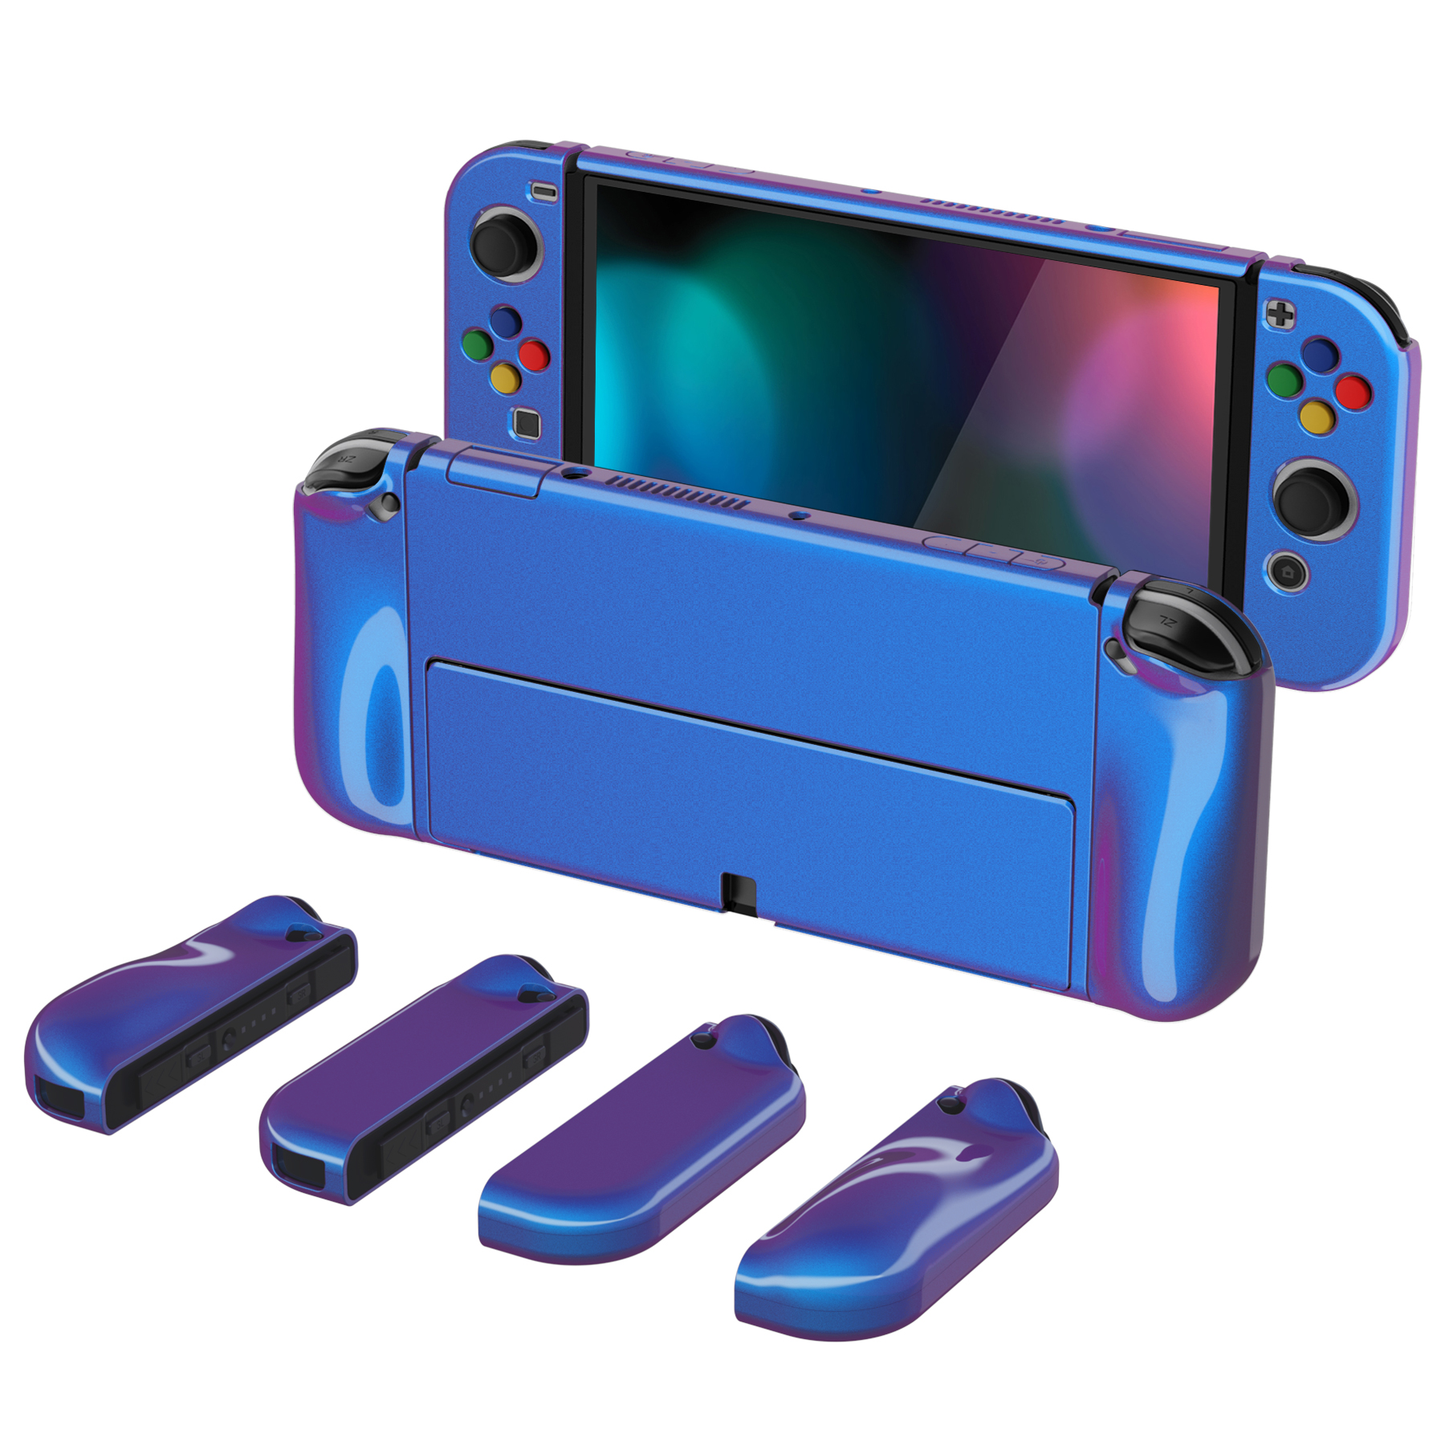 PlayVital AlterGrips Glossy Protective Slim Case for Nintendo Switch OLED, Ergonomic Grip Cover for Joycon, Dockable Hard Shell for Switch OLED w/Thumb Grip Caps & Button Caps - Chameleon Purple Blue - JSOYP3001 playvital